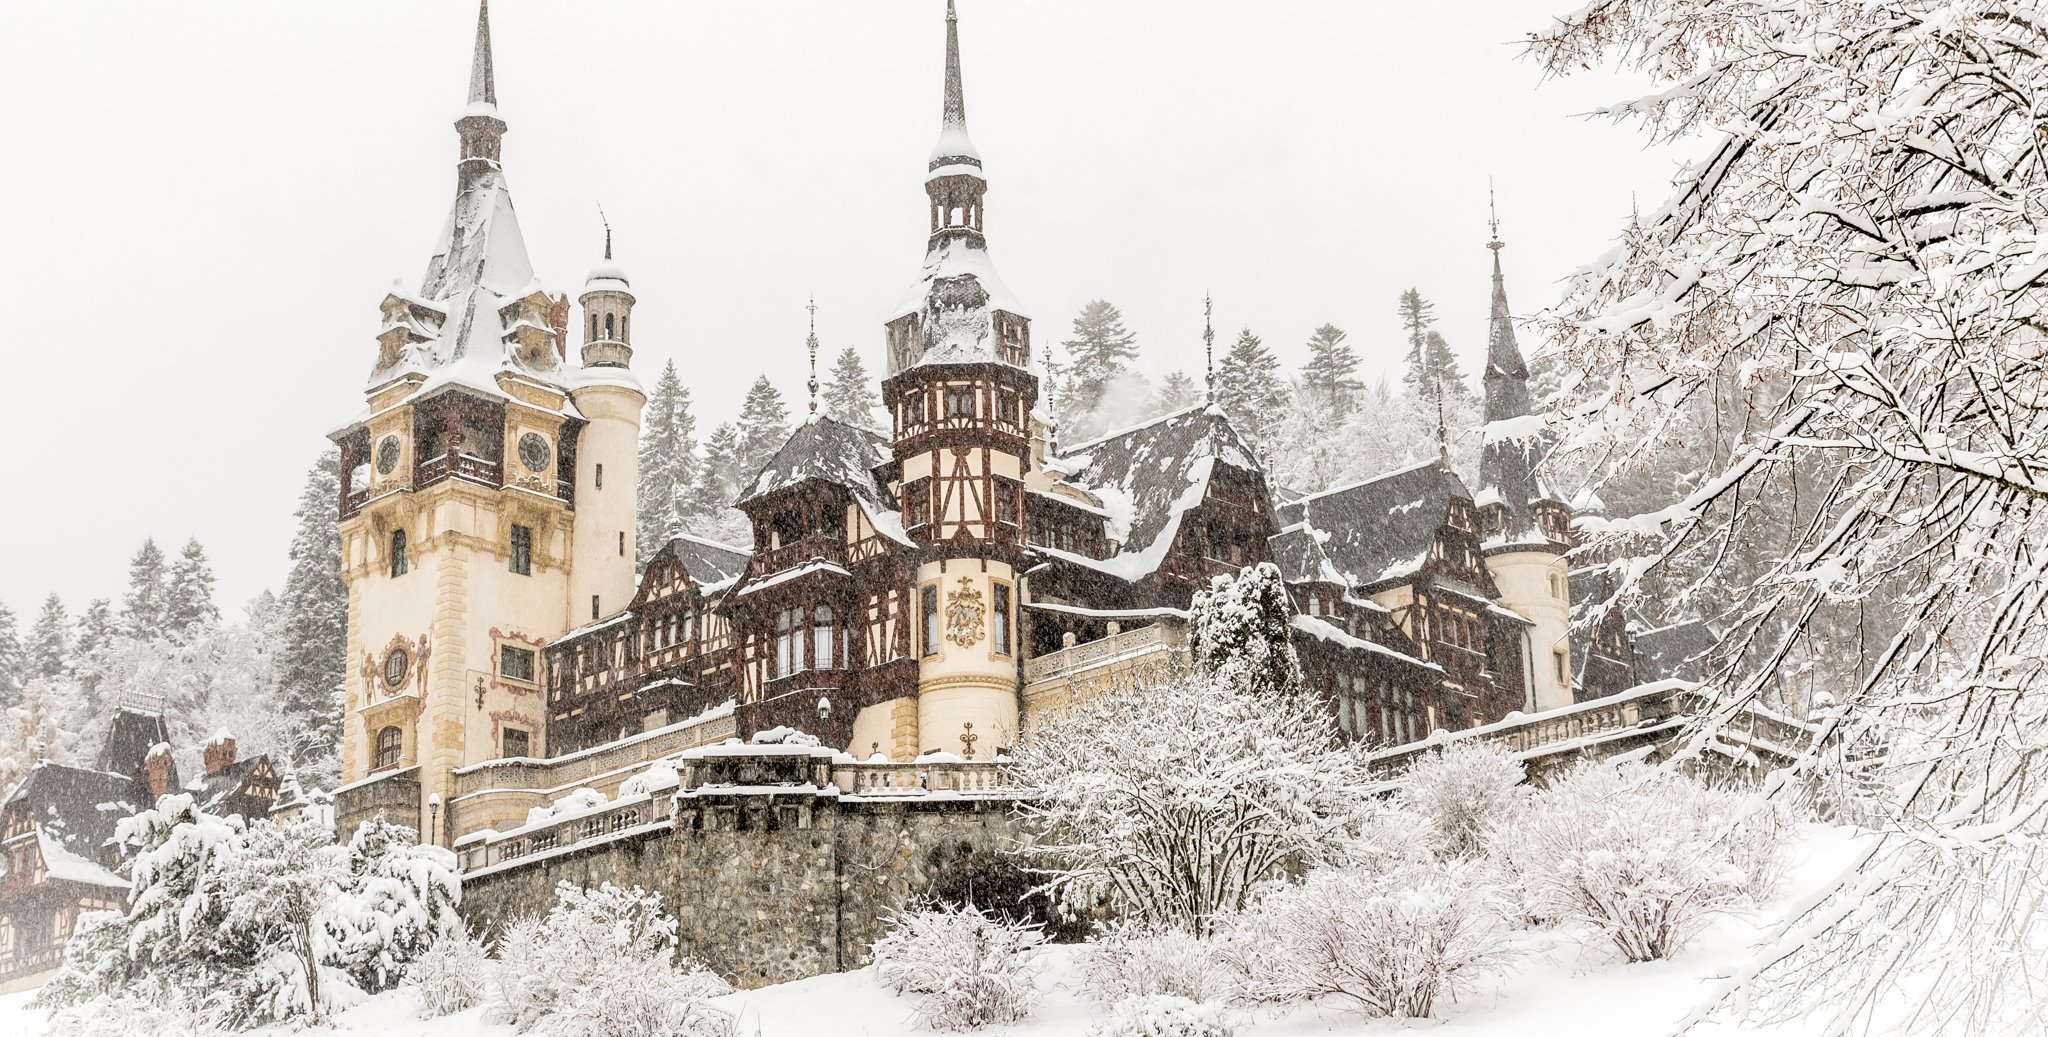 12 Reasons To Visit This Charming European City Where Hallmark Christmas Movies Are Filmed